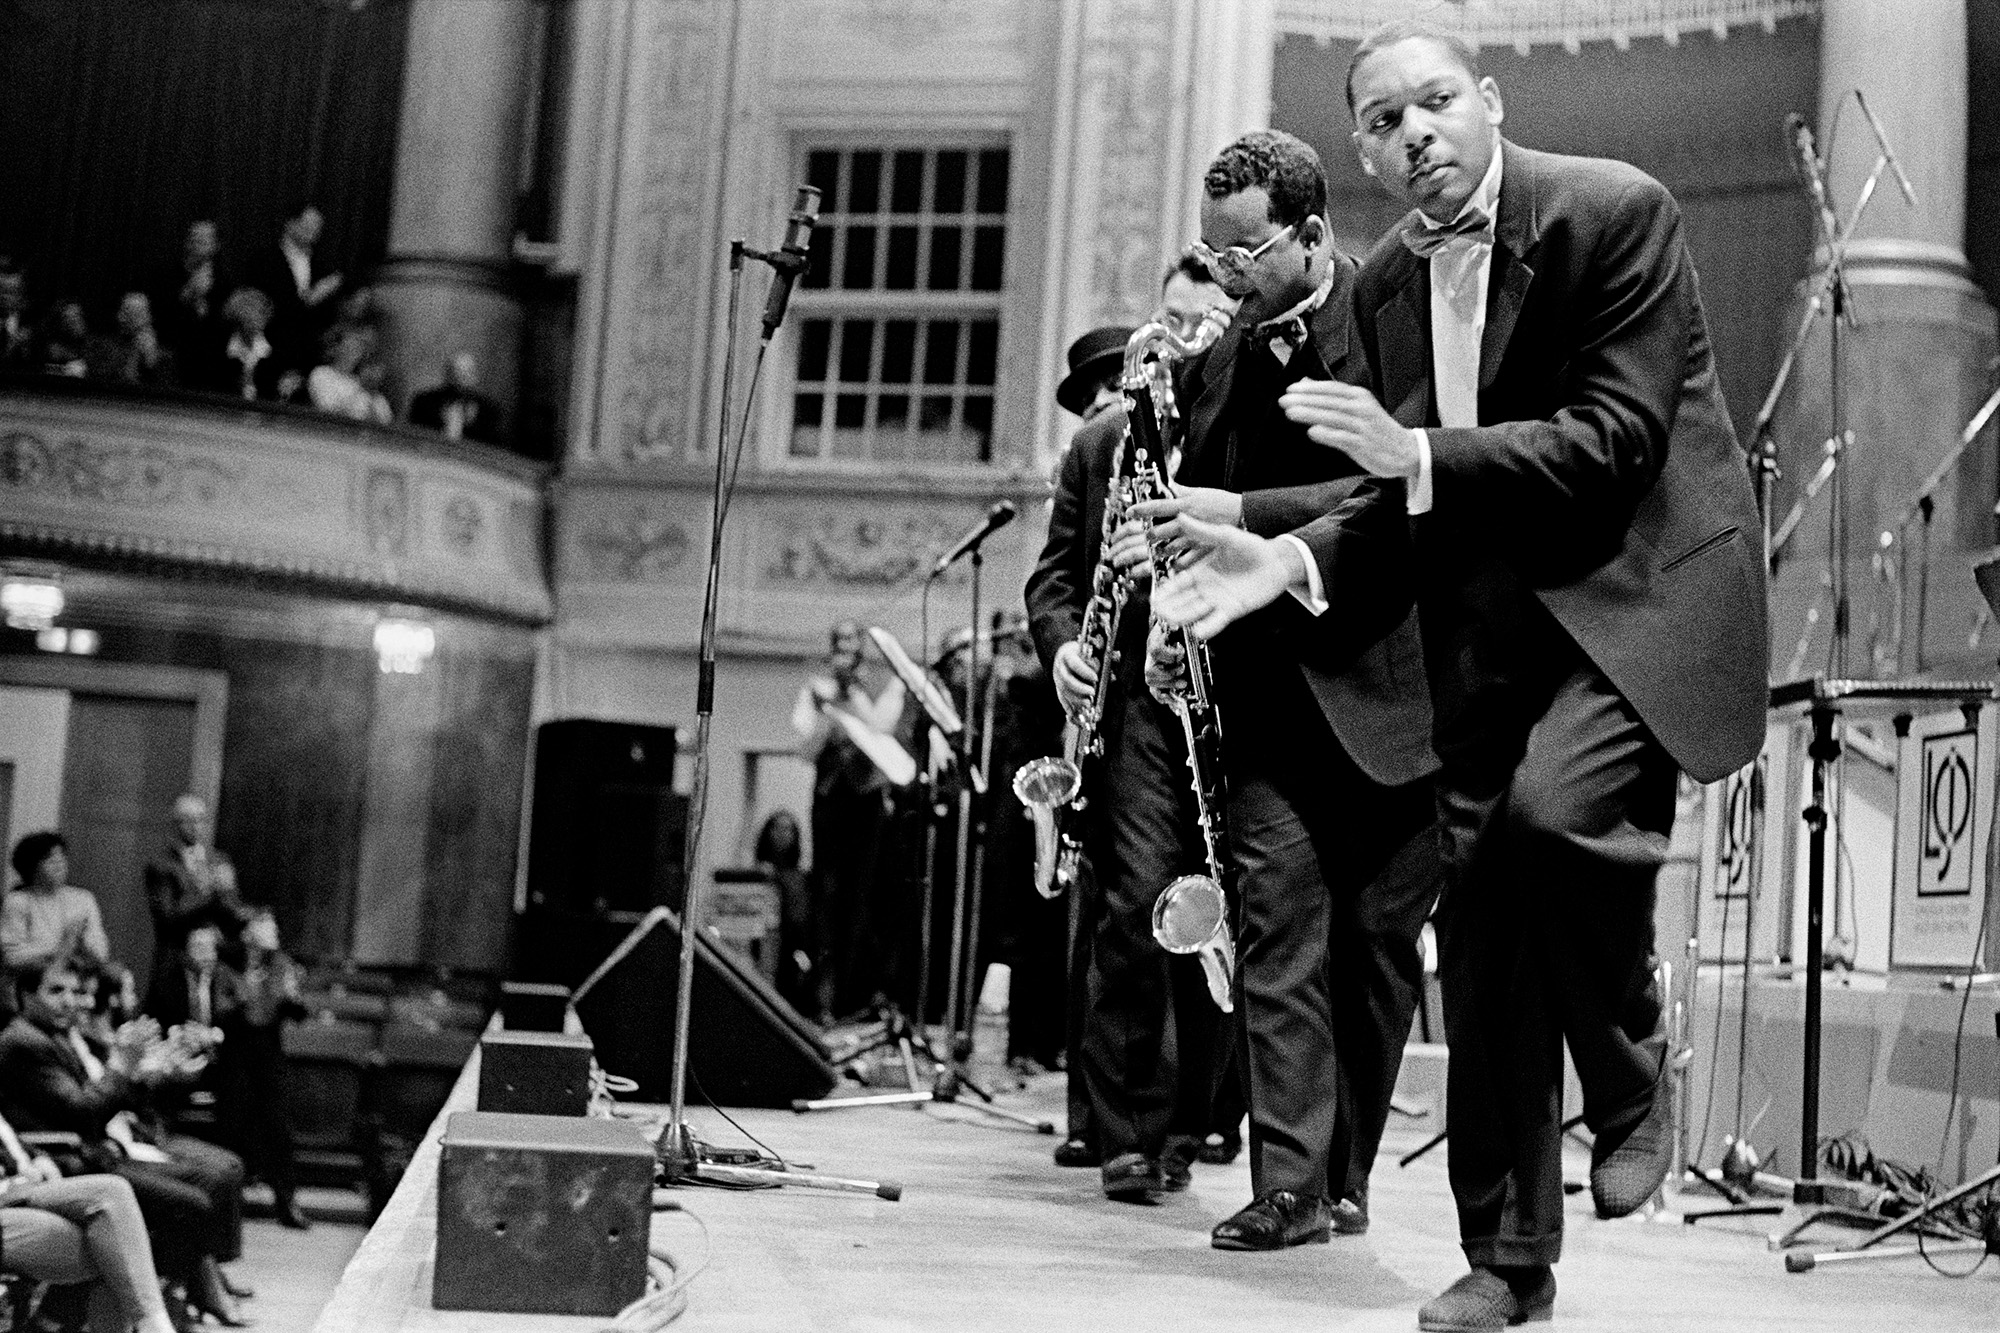 Black and white photo of a black jazz group on stage looking towards the camera on the right